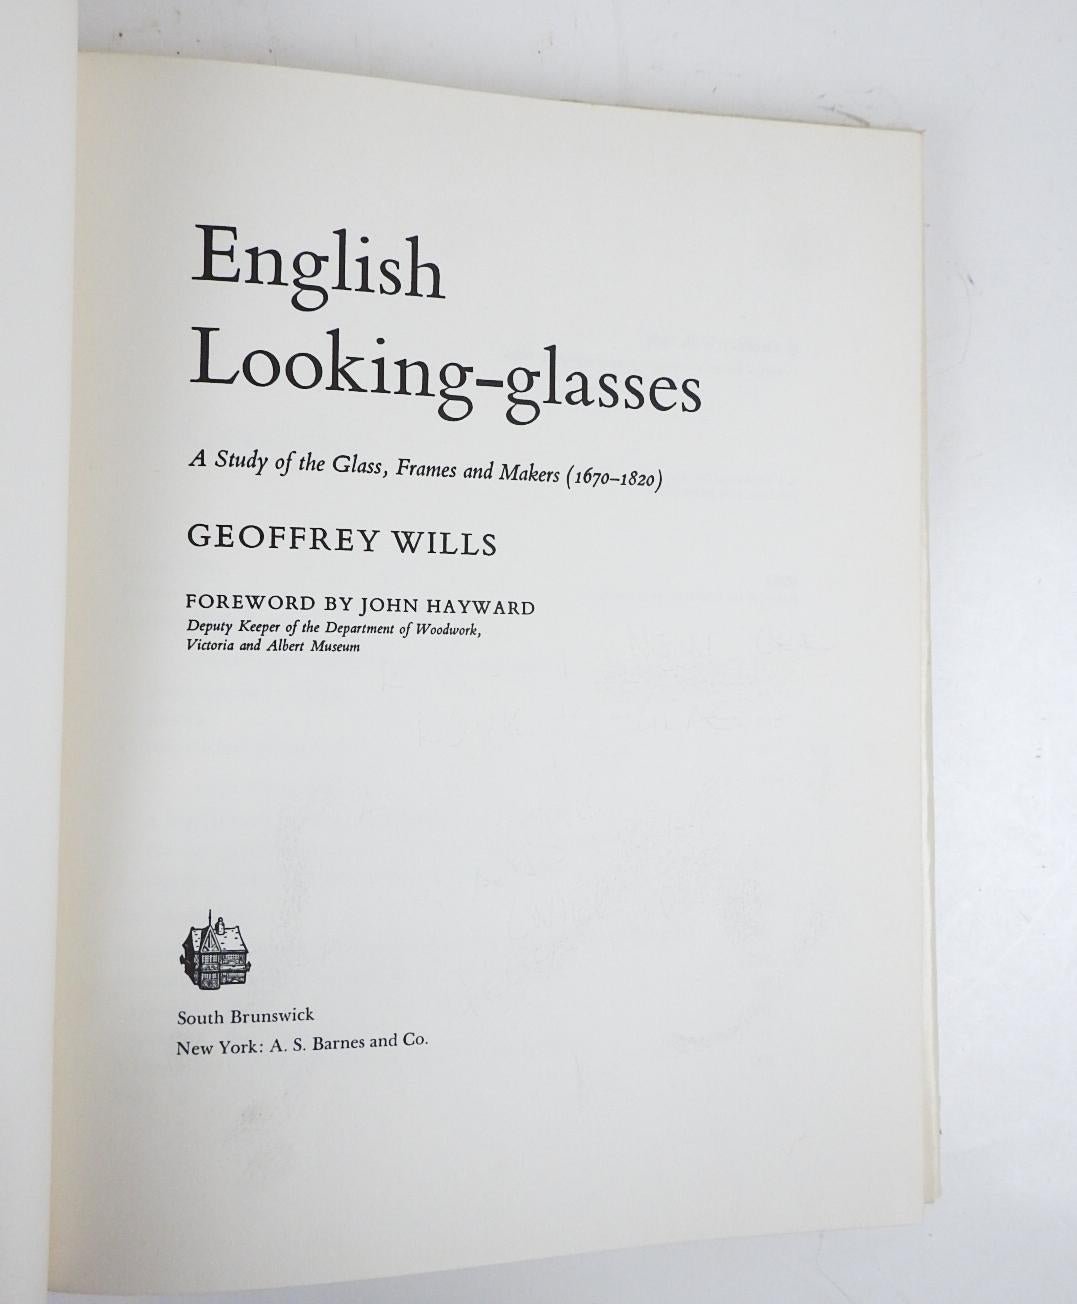 English Looking-Glasses: A Study of the Glass, Frames, and Makers (1670-1820) by Geoffrey Wills.  Published by A.S. Barnes, New York, 1967.  Illustrated dust jacket, white cloth binding, many black and white illustrations, edge wear and small tears